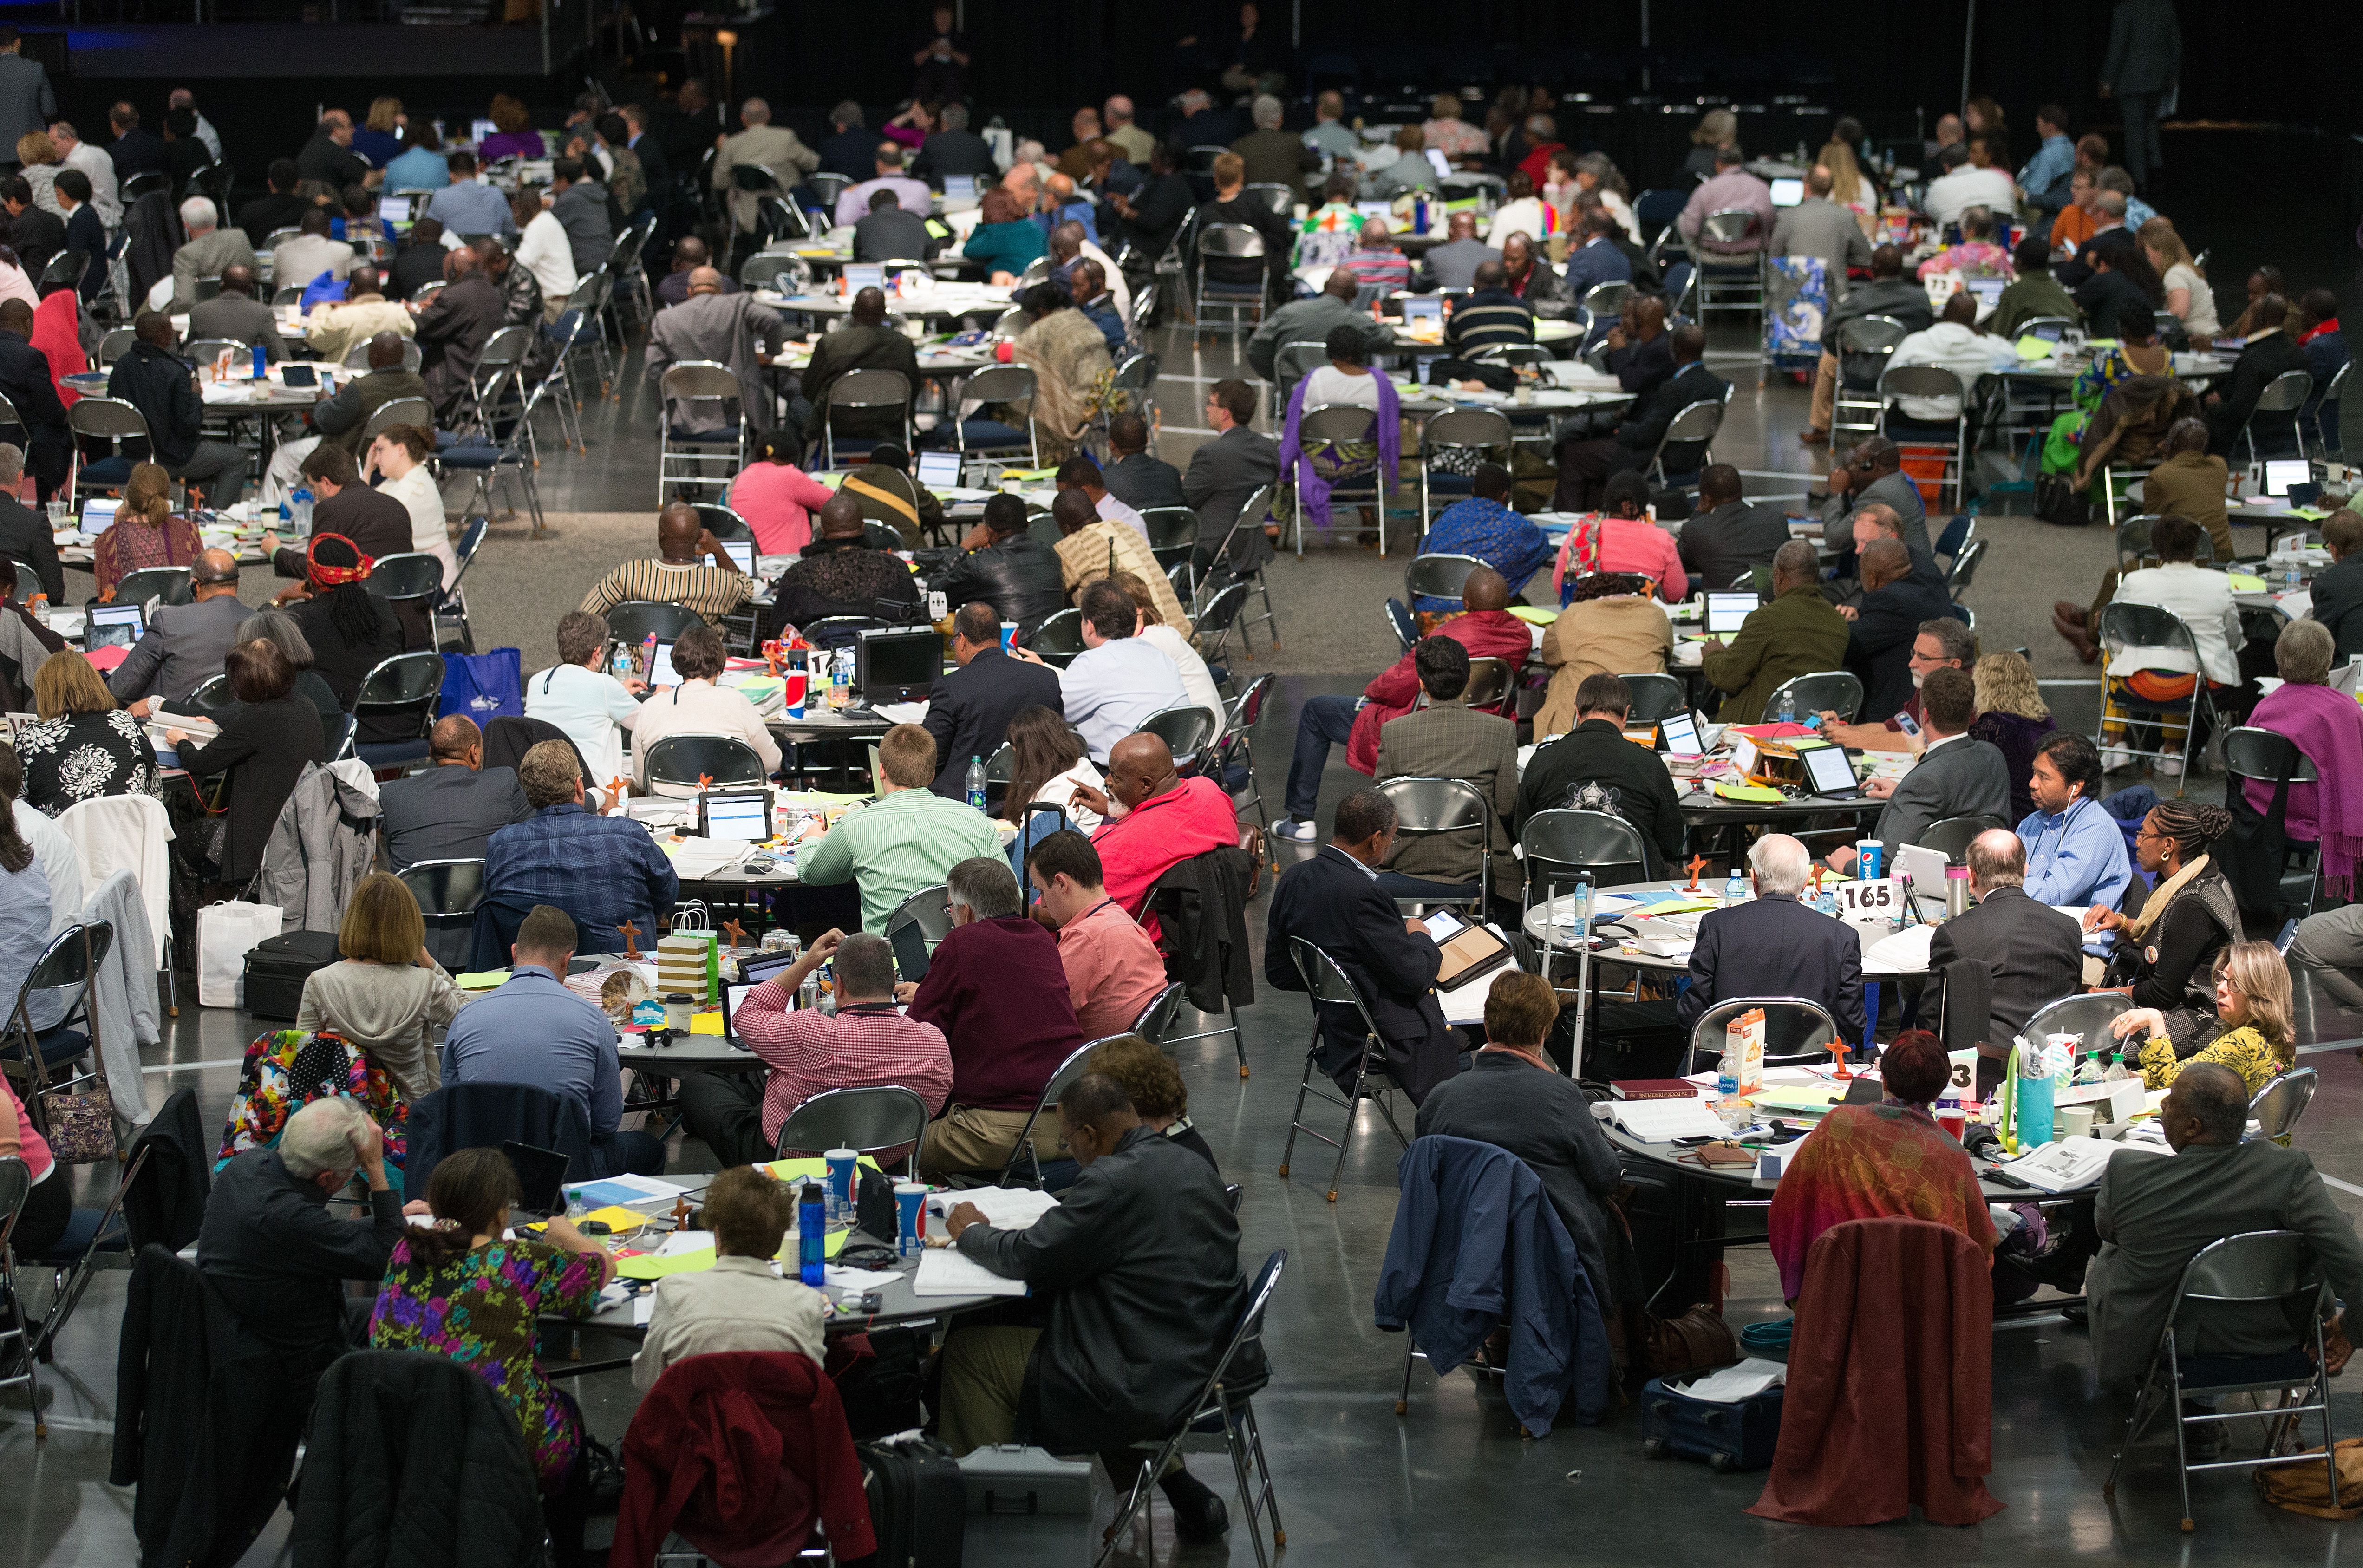 Delegates consider legislation during the 2016 United Methodist General Conference in Portland, Ore. File photo by Mike DuBose, UMNS.